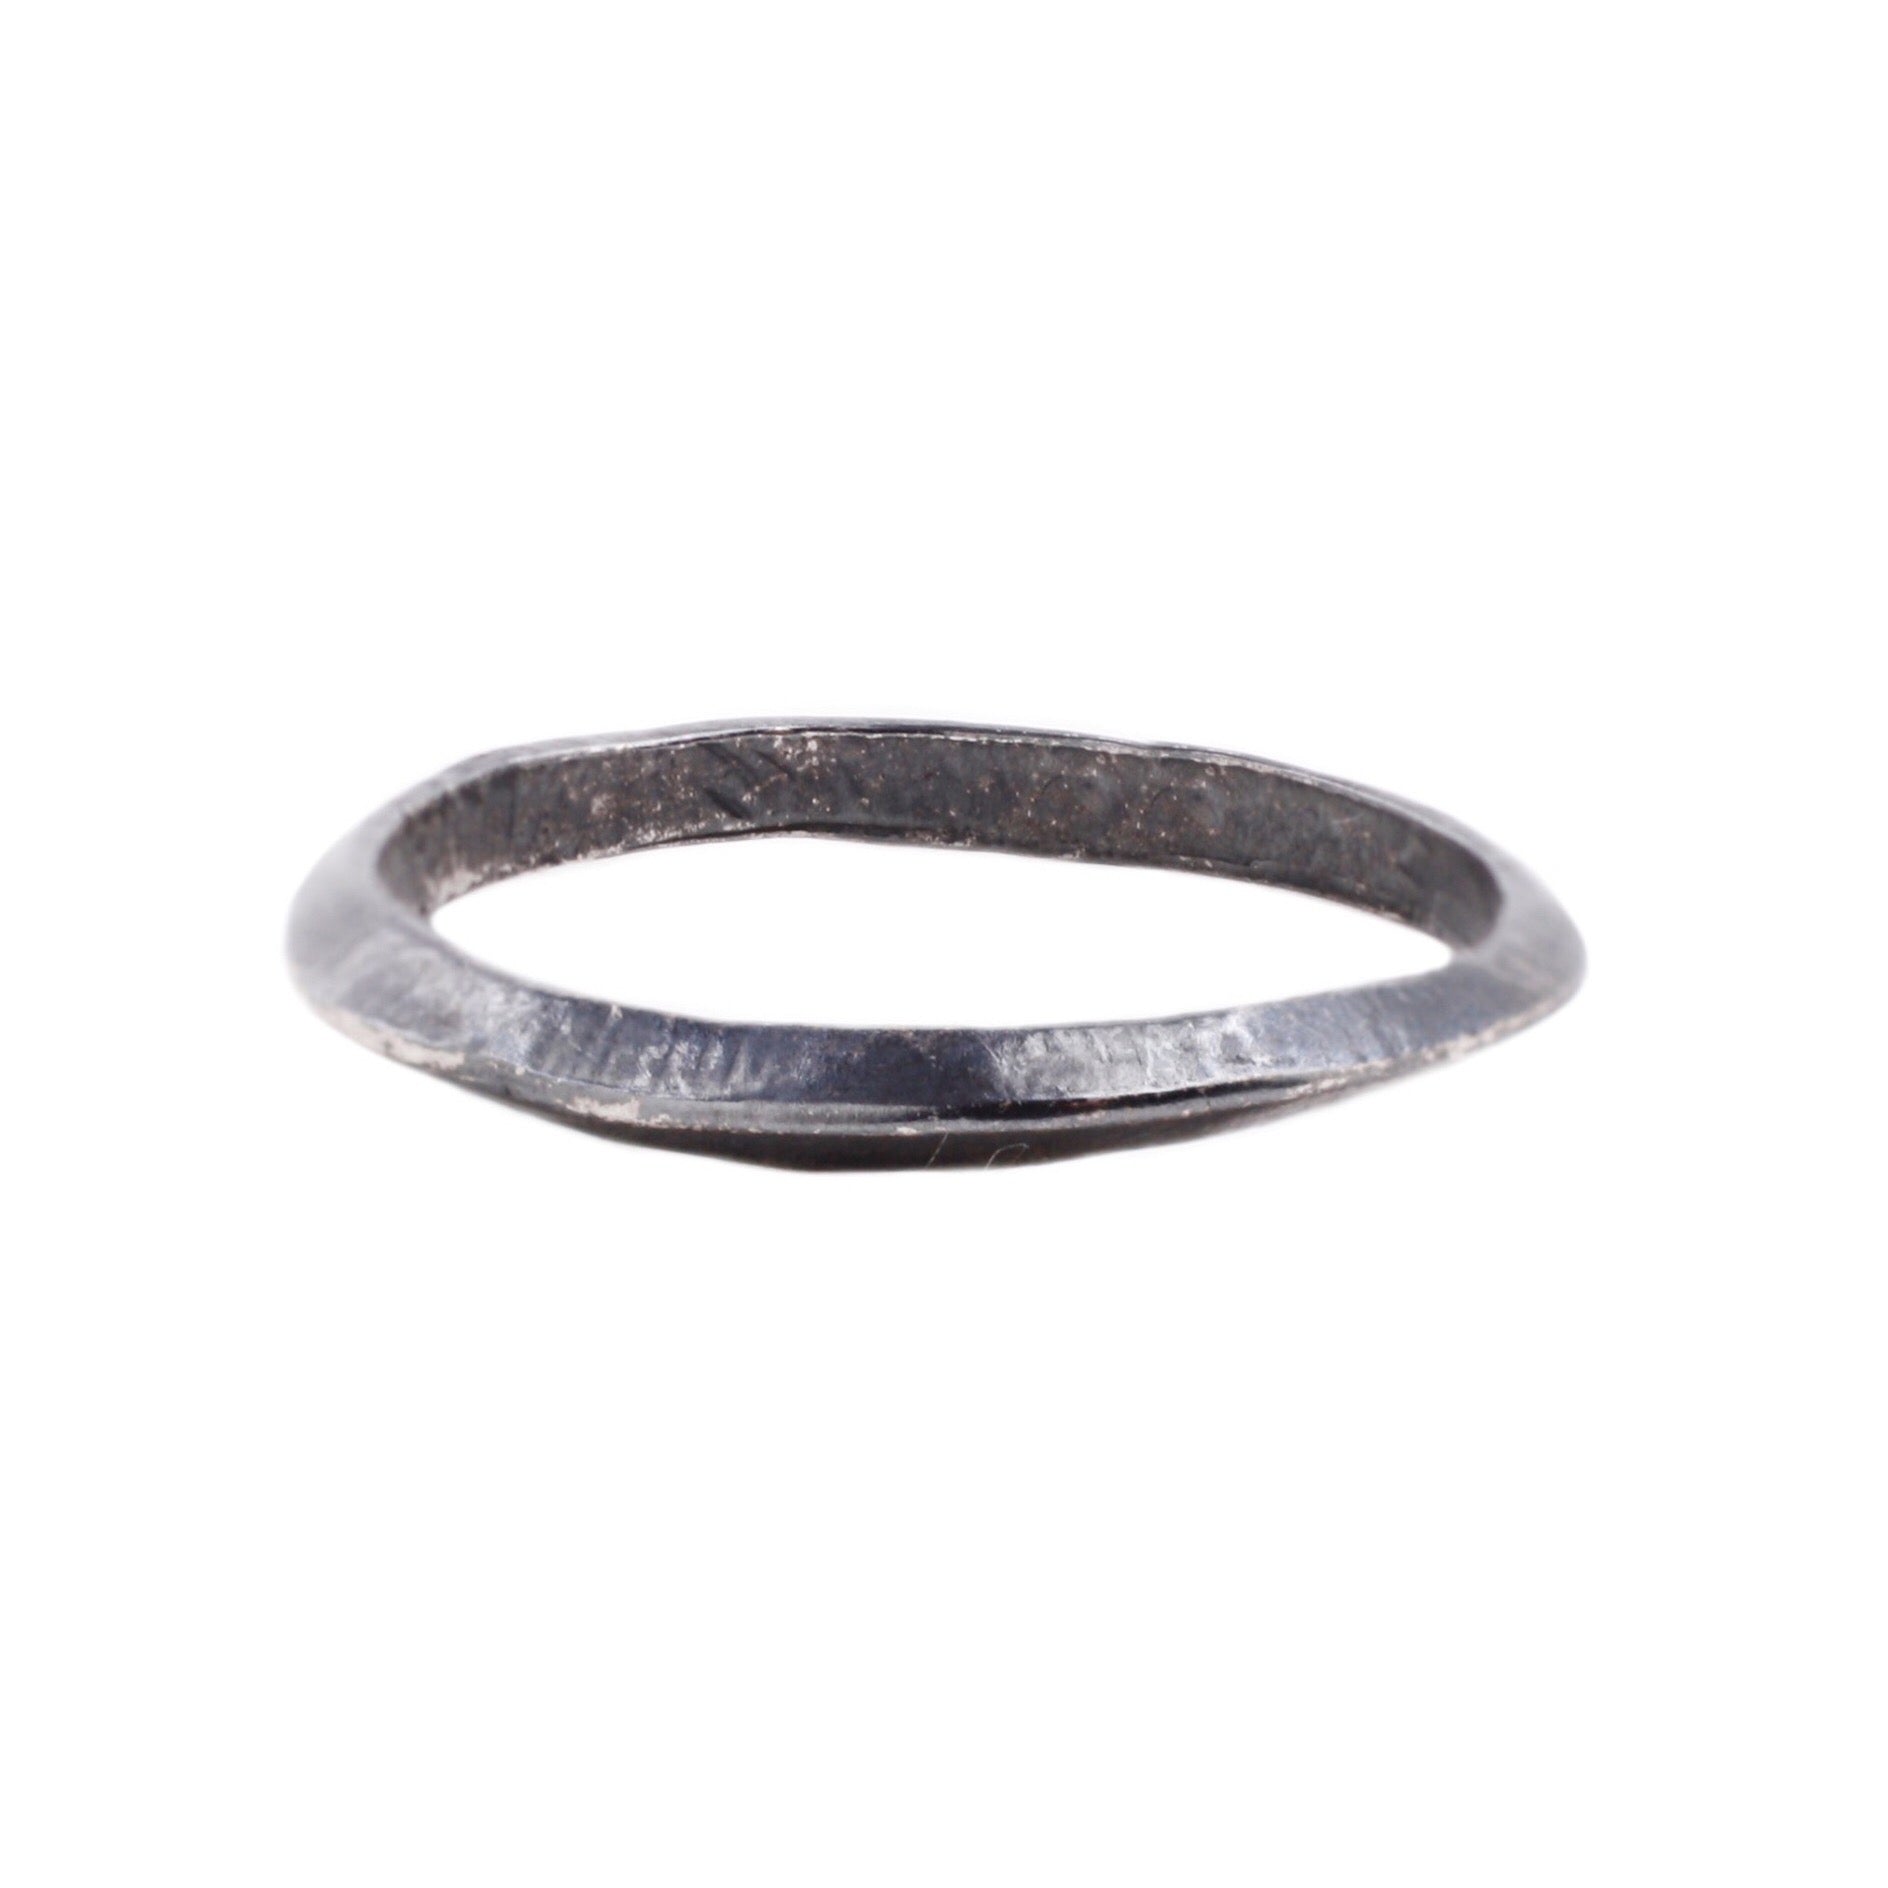 Axis Ring : Oxidized Silver